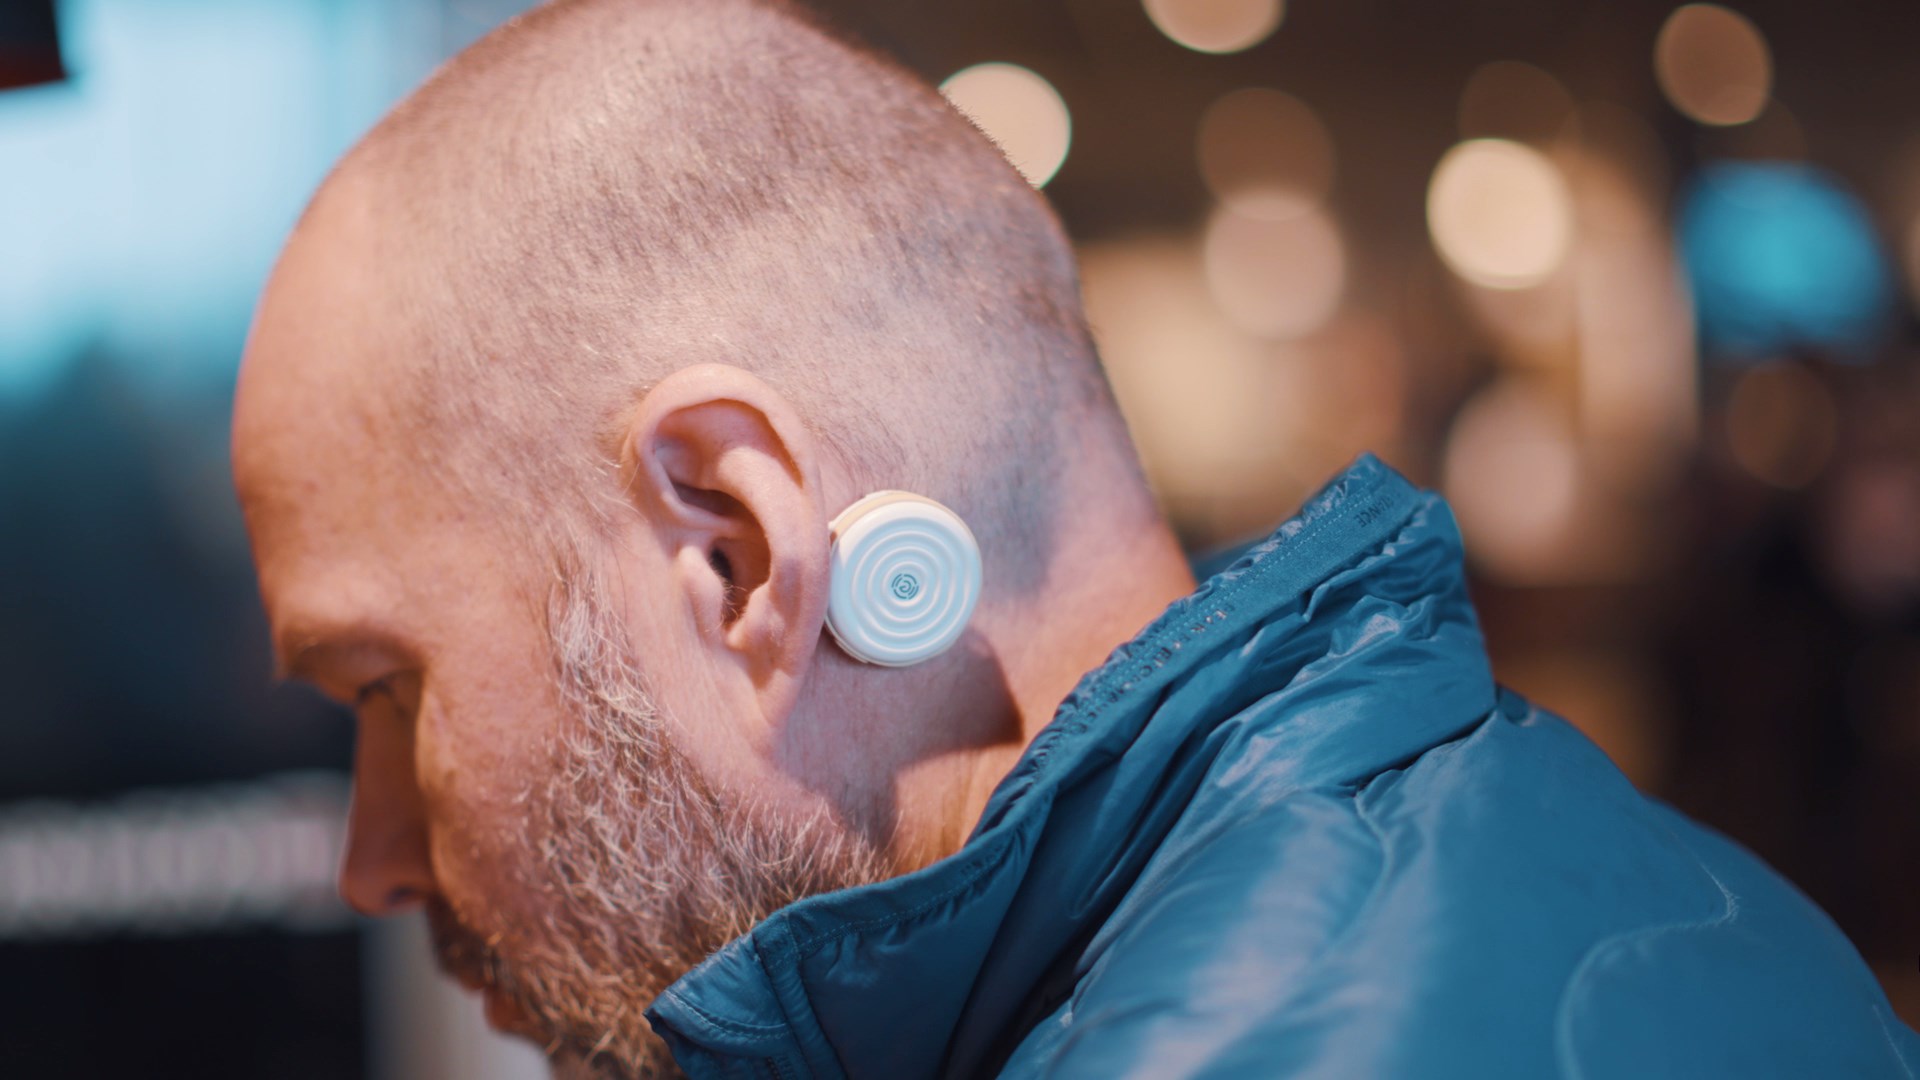 Fredrik relieves his tinnitus with the help of Tinearity G1